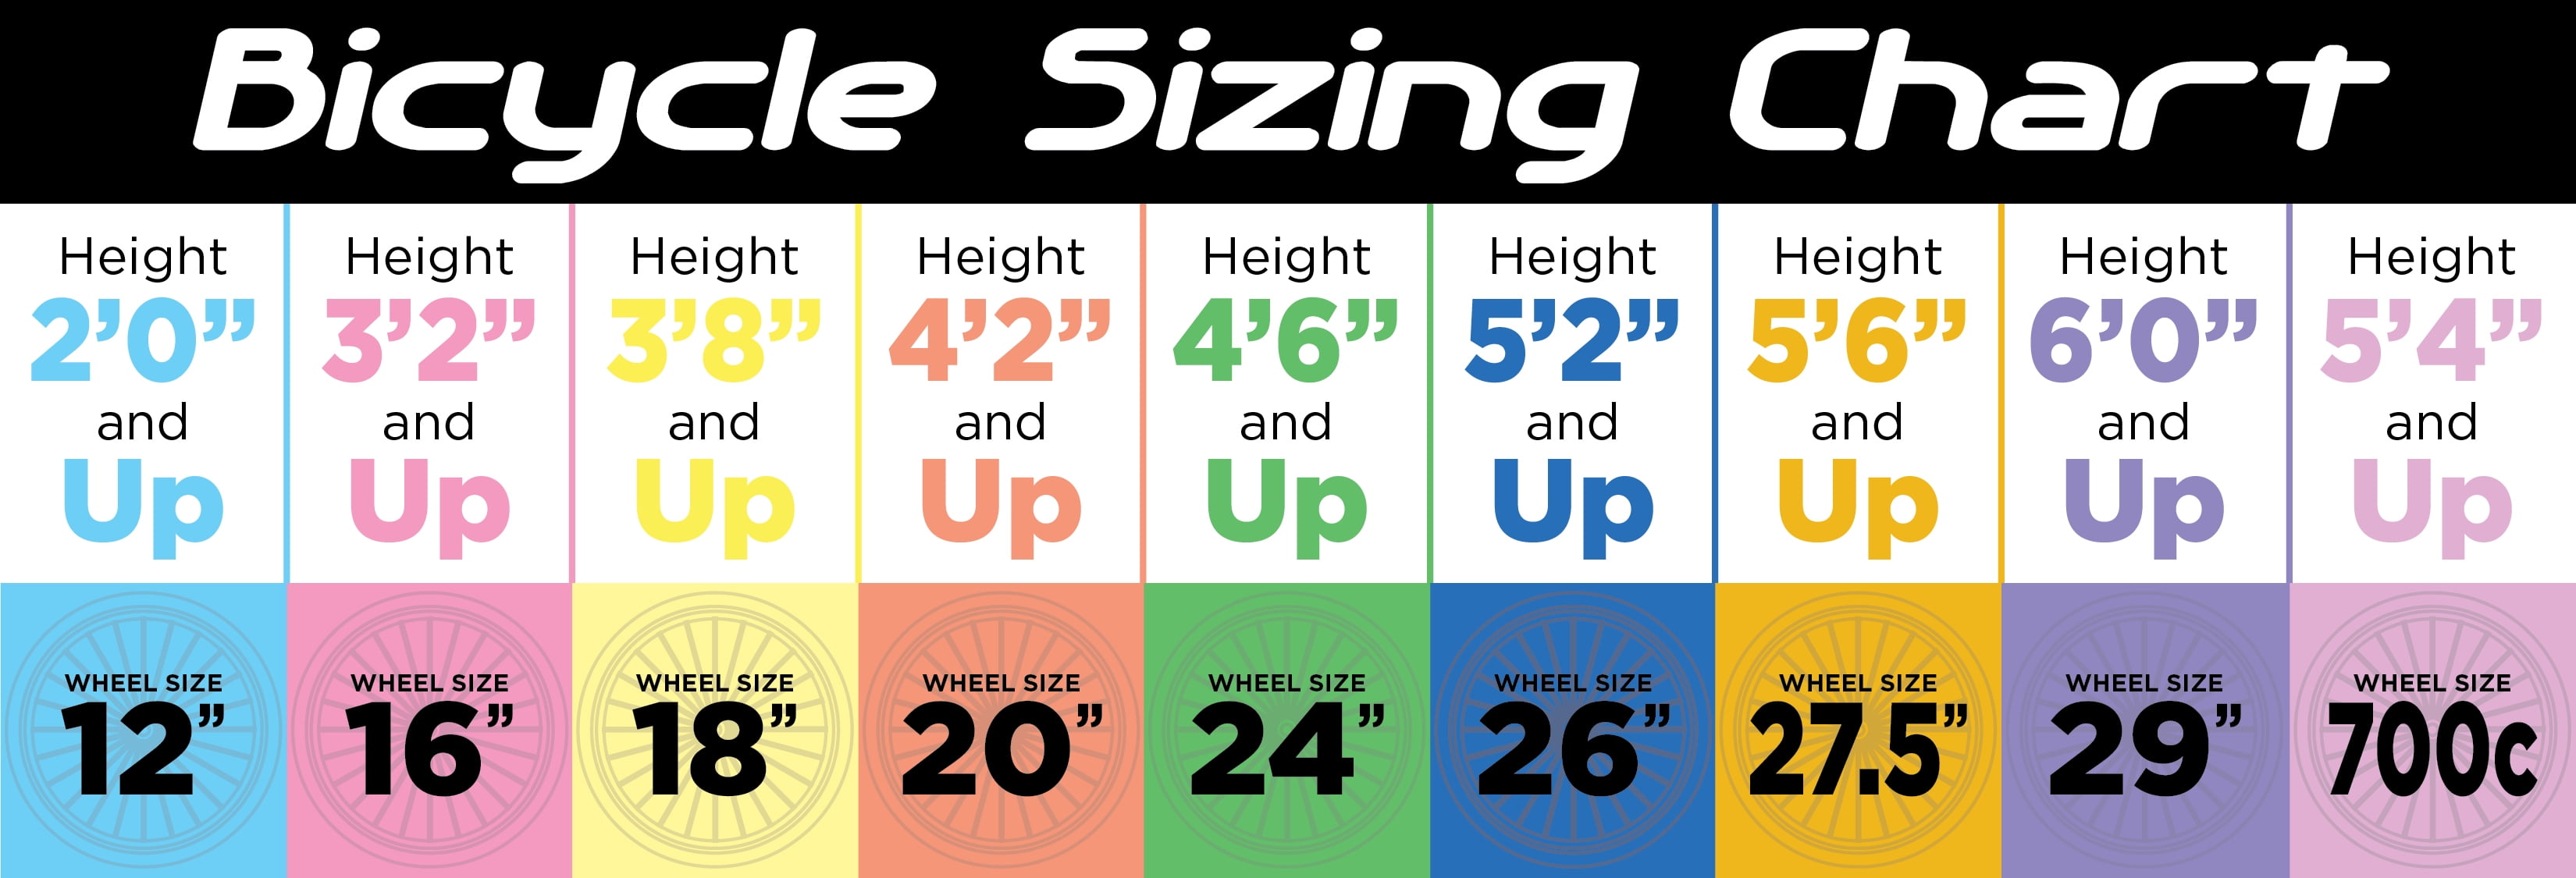 bicycle height guide